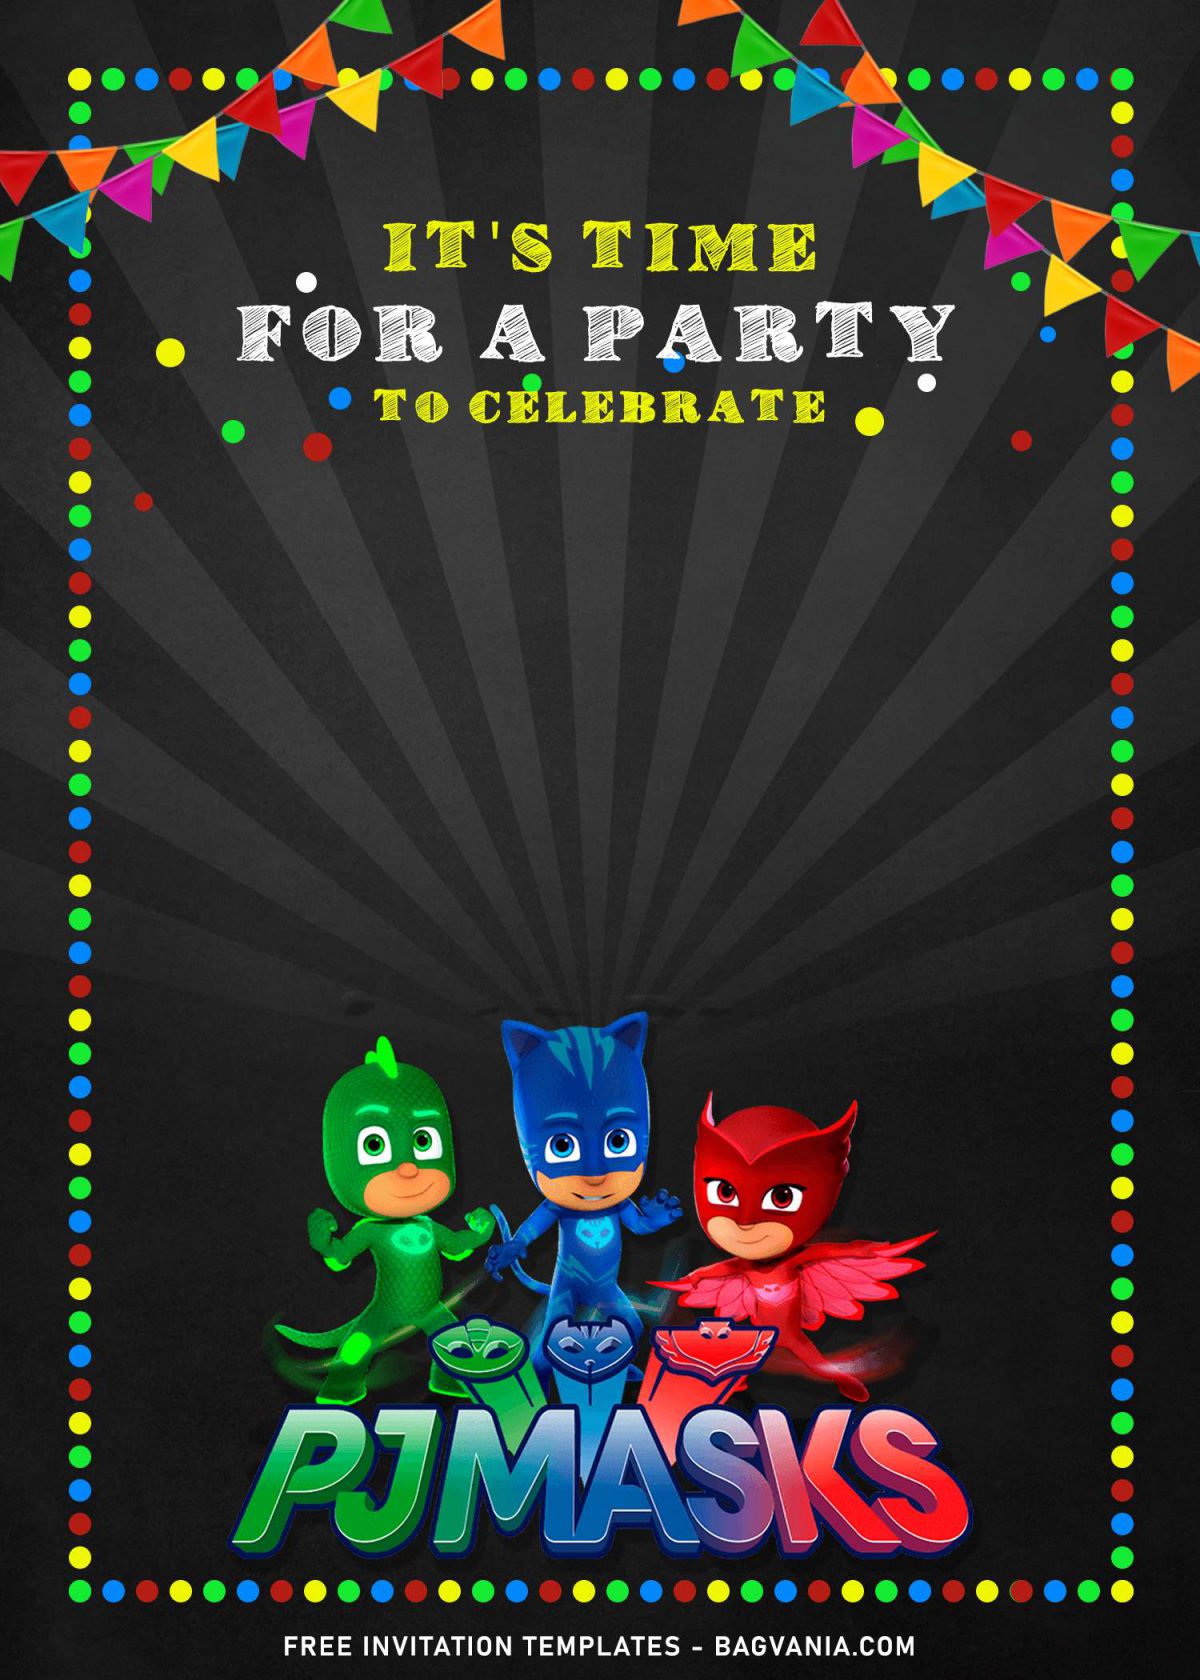 10+ Gecko Owlette Catboy PJ Masks Birthday Invitation Templates and has Colorful decorations